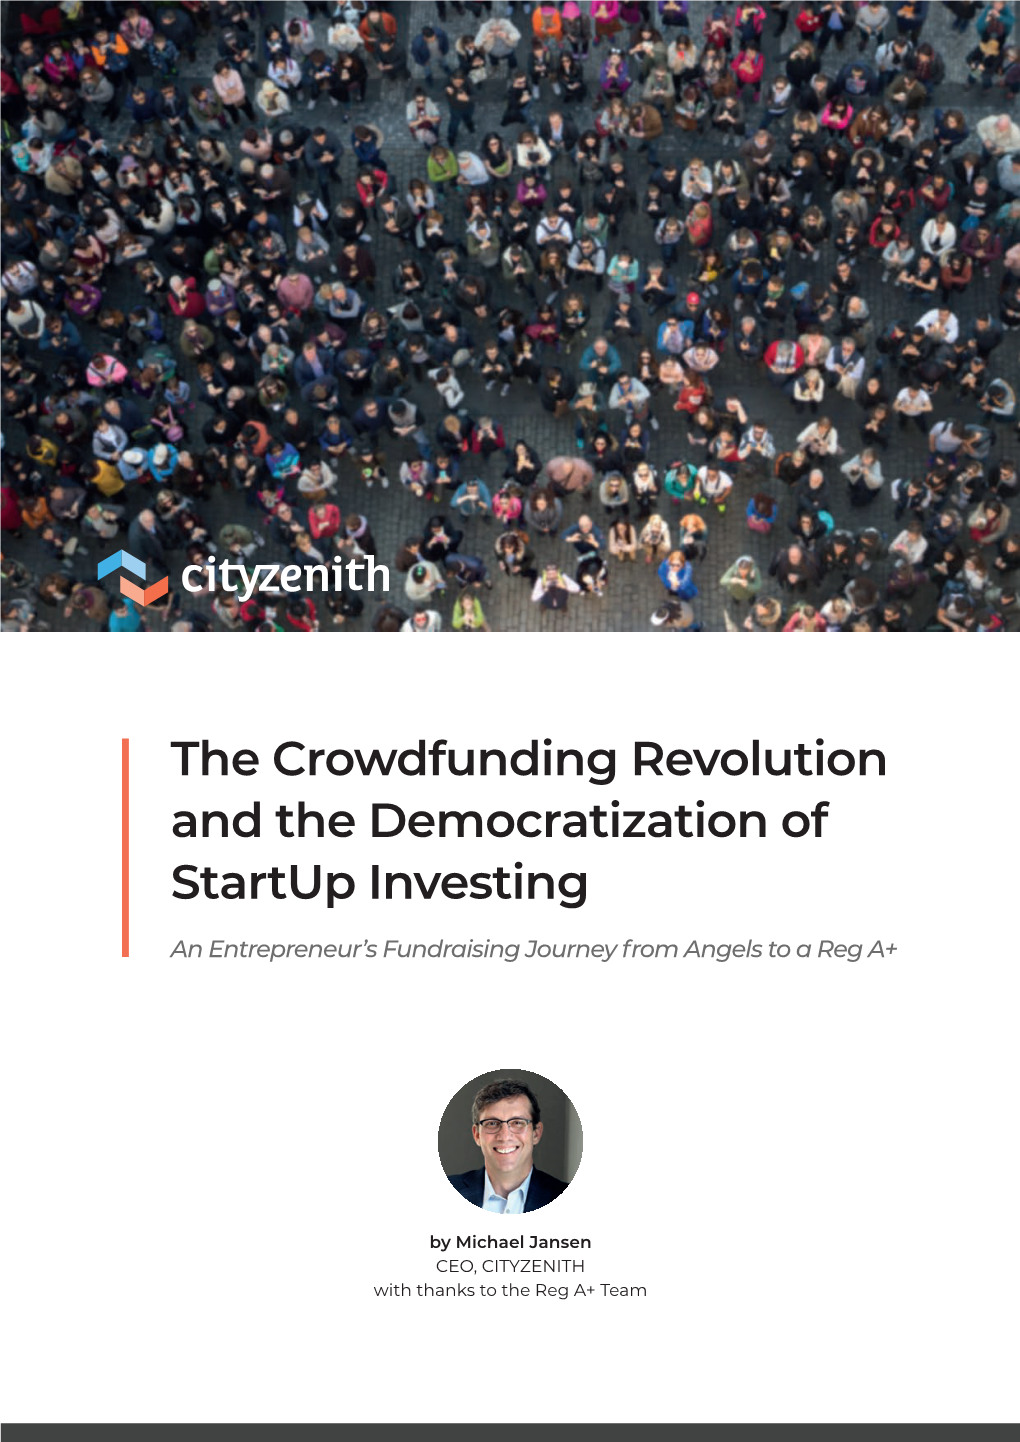 The Crowdfunding Revolution and the Democratization of Startup Investing